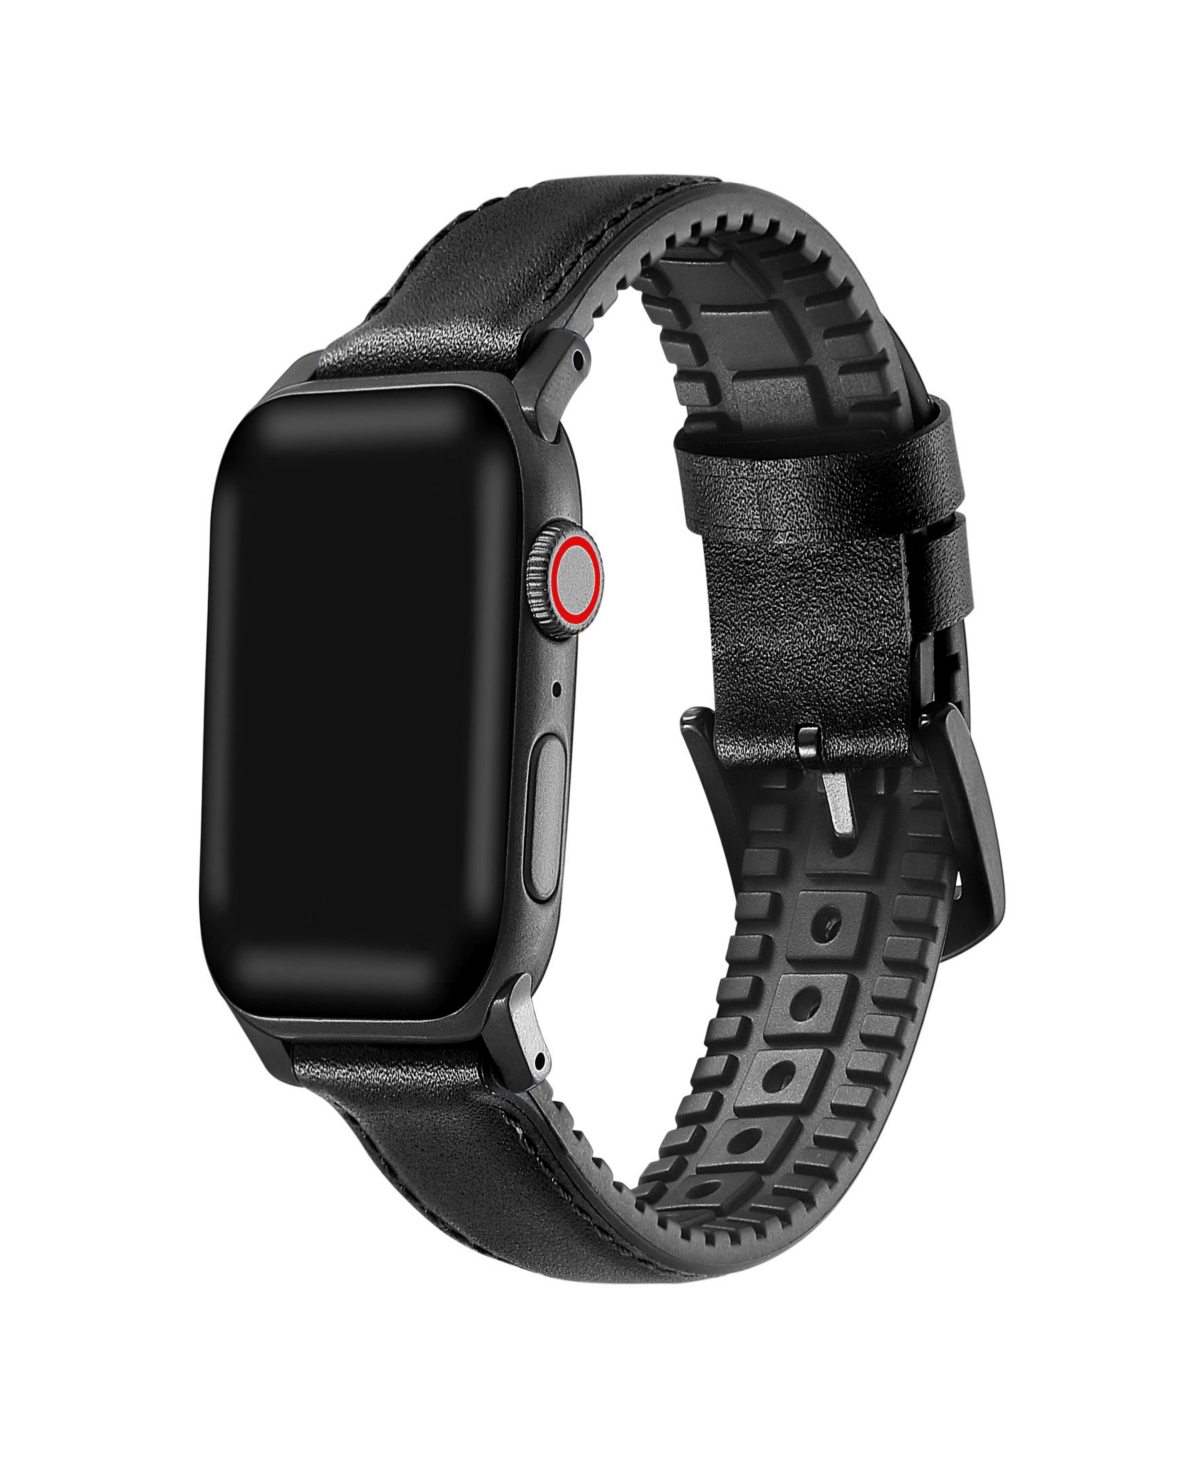 Men's and Women's Genuine Black Leather Band for Apple Watch 42mm - Black